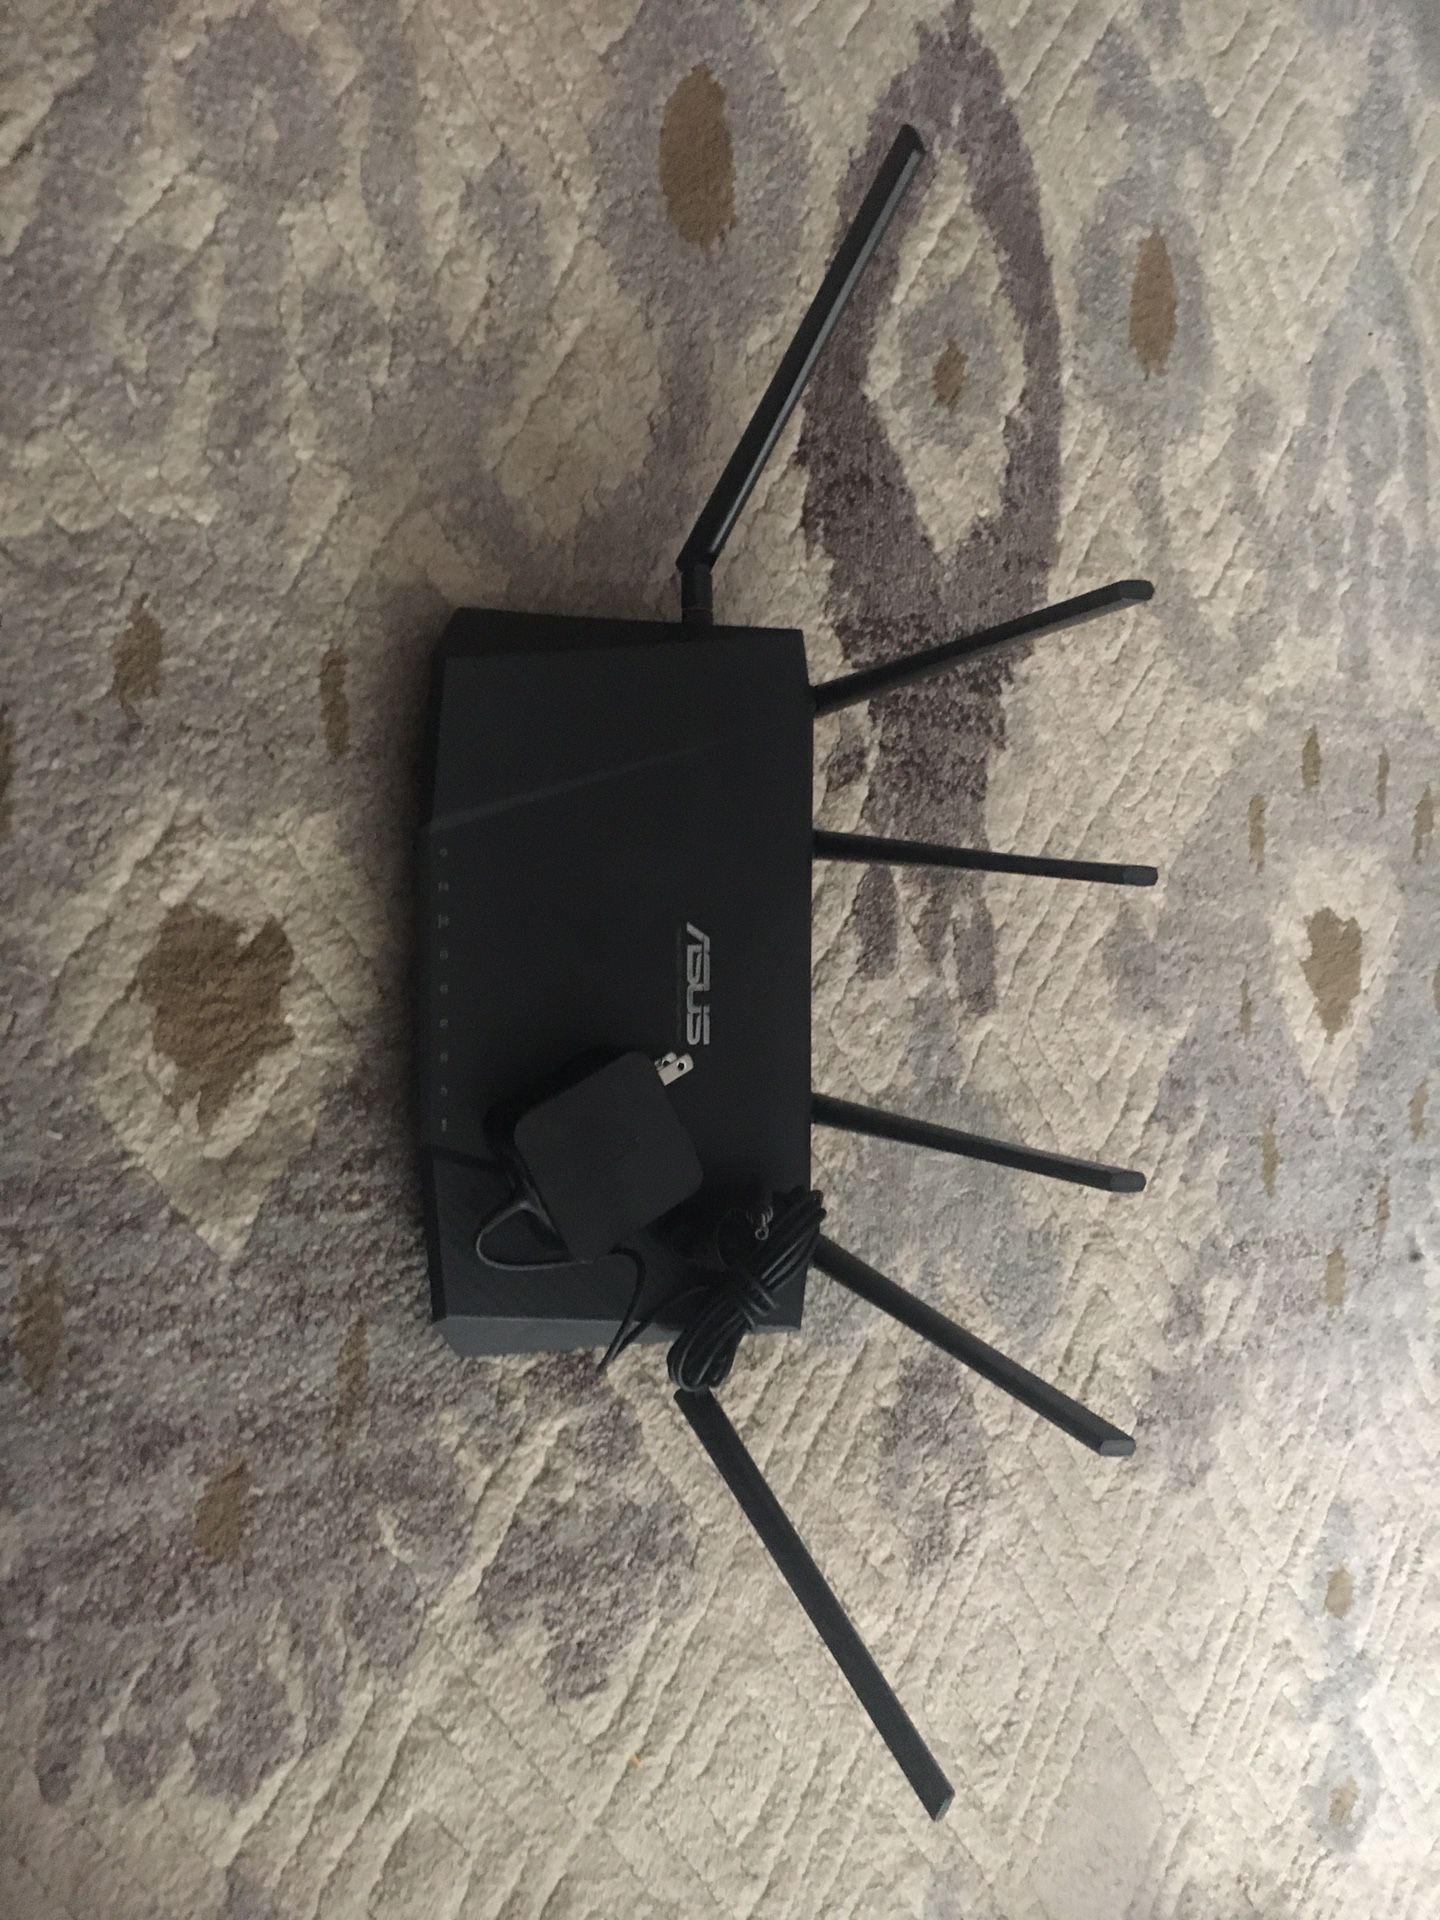 Asus Wireless AC3200 Tri-band Gigabit Router